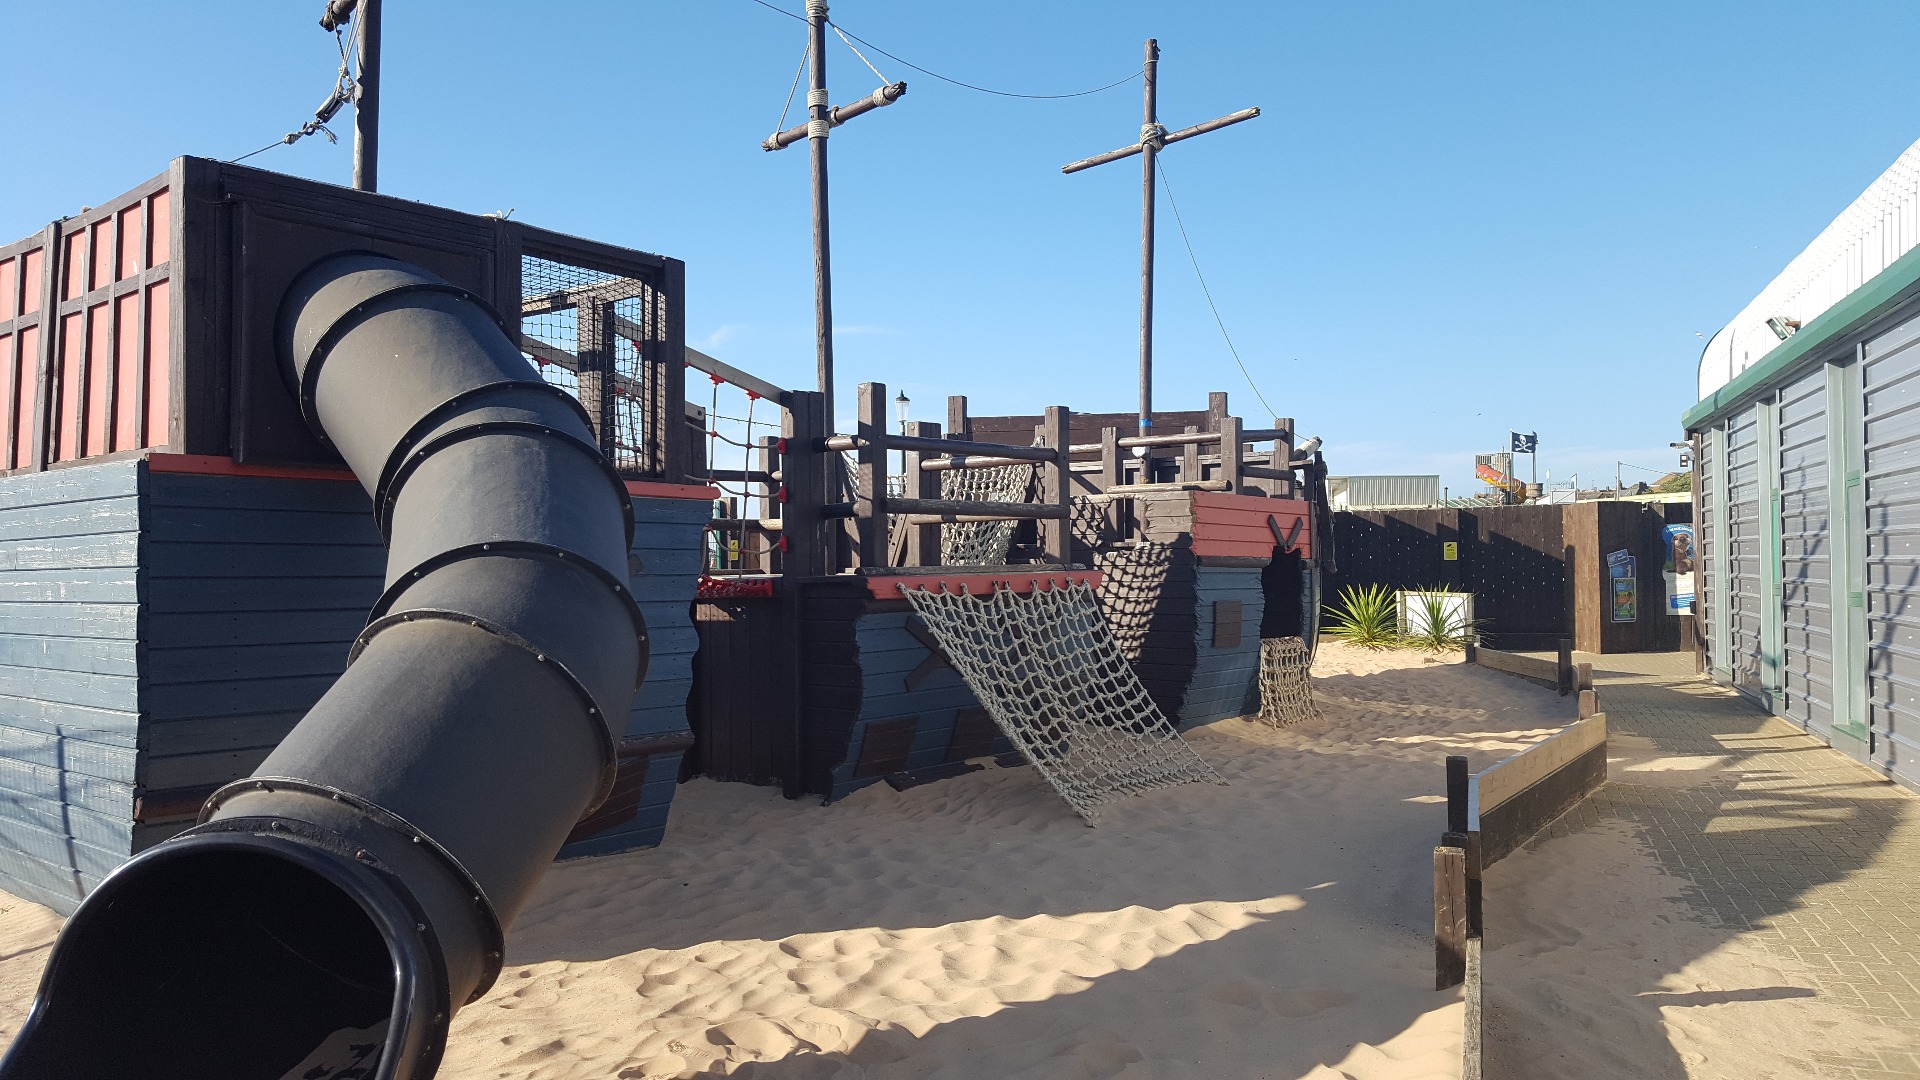 Pirate Ship Play Area